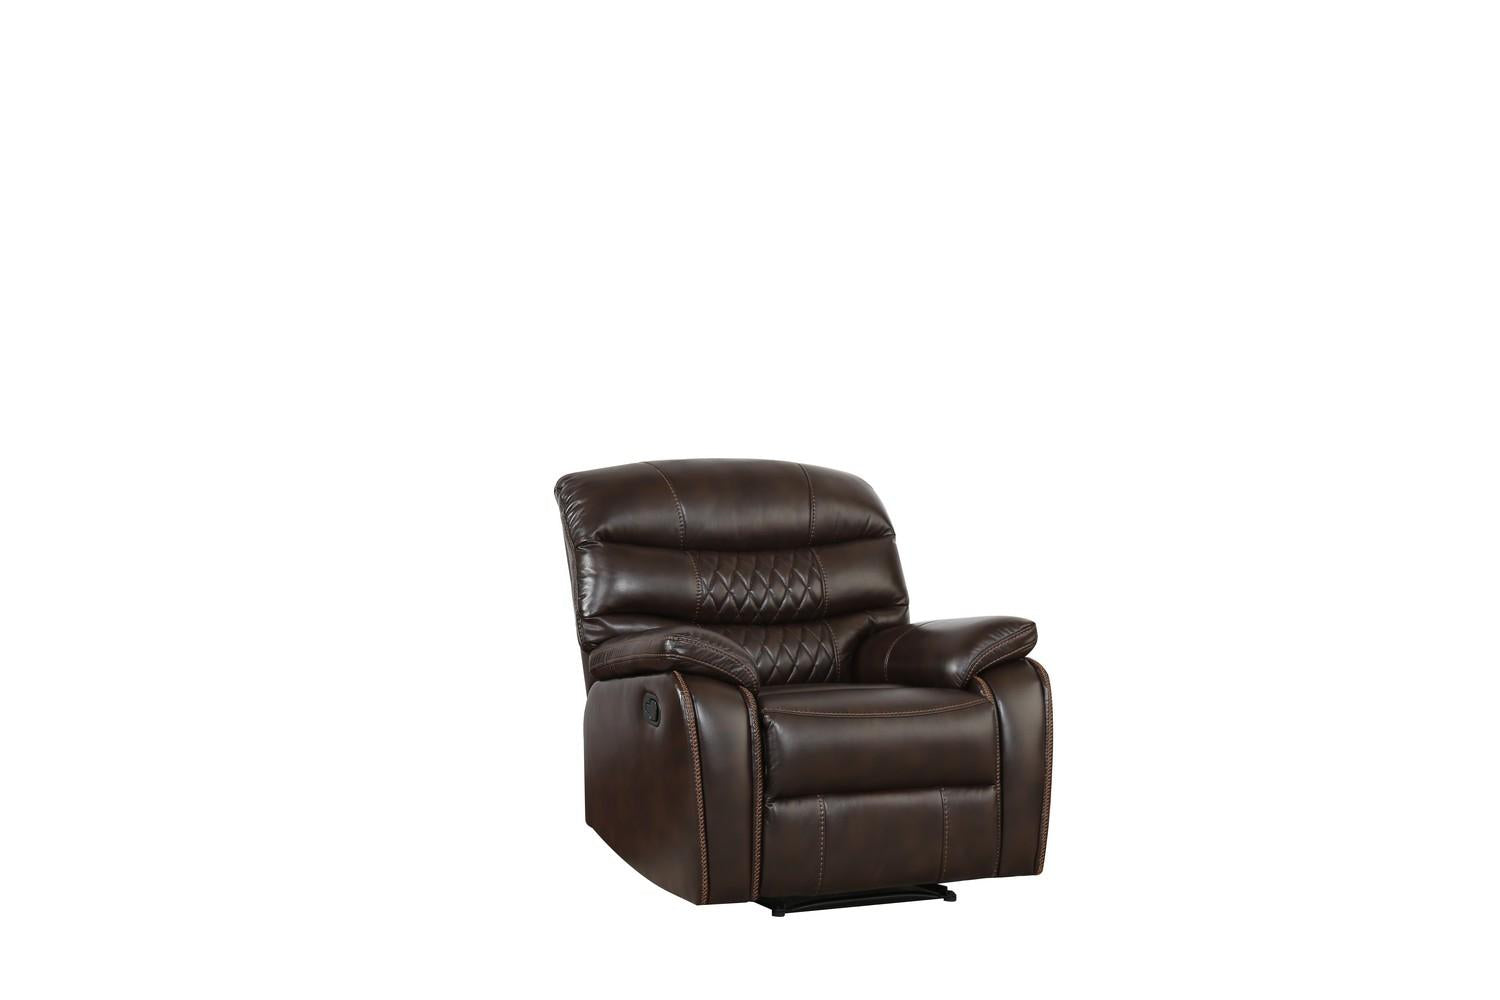 Dark Brown Faux Leather Recliner Chair